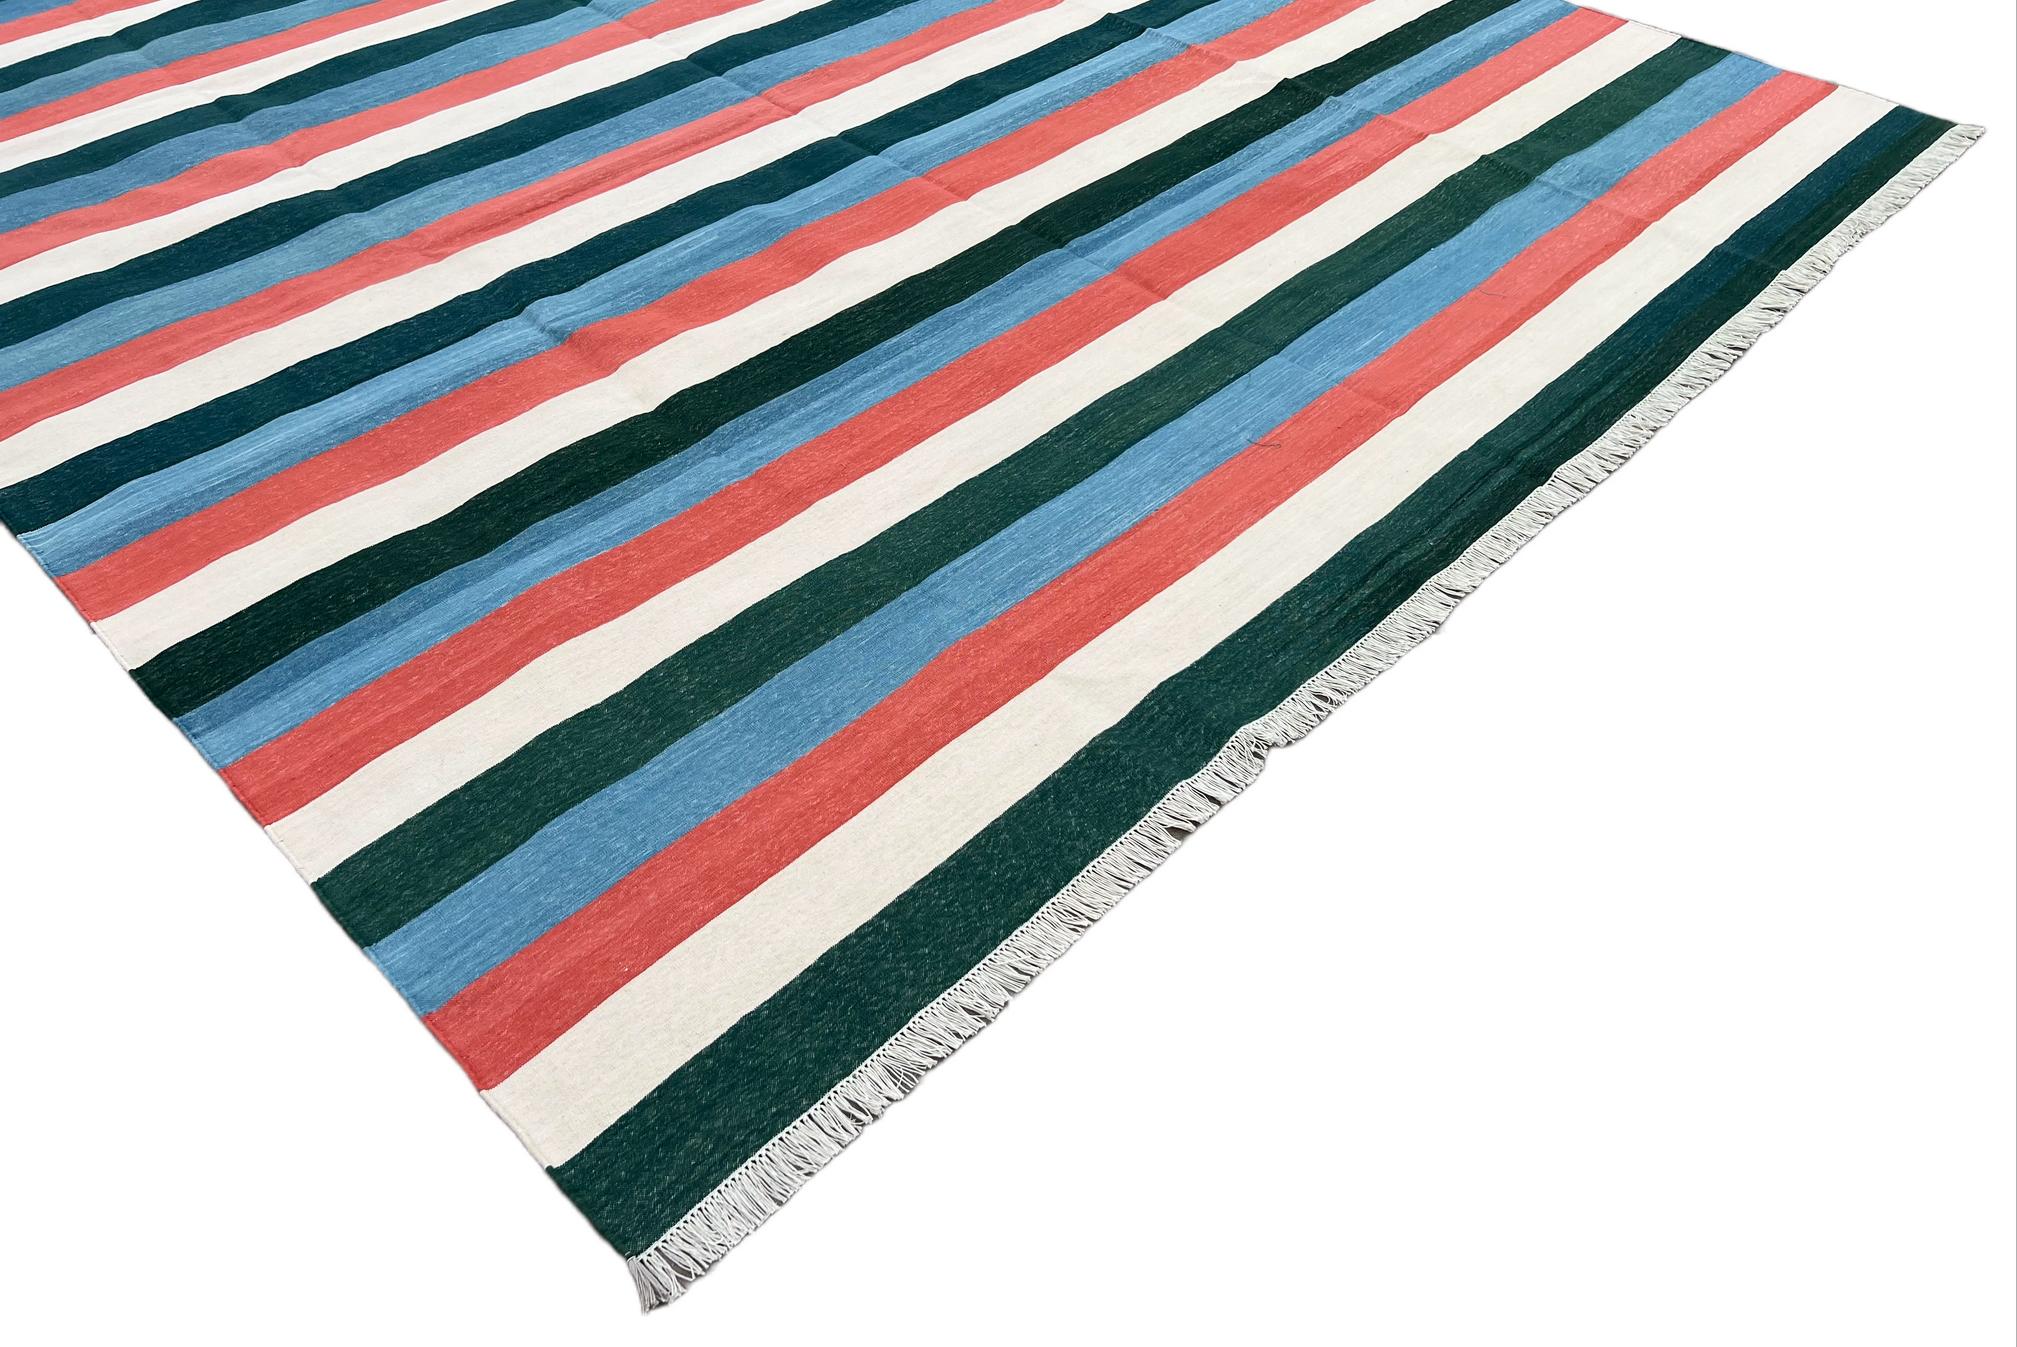 Hand-Woven Handmade Cotton Area Flat Weave Rug, 8x10 Green And Blue Striped Indian Dhurrie For Sale